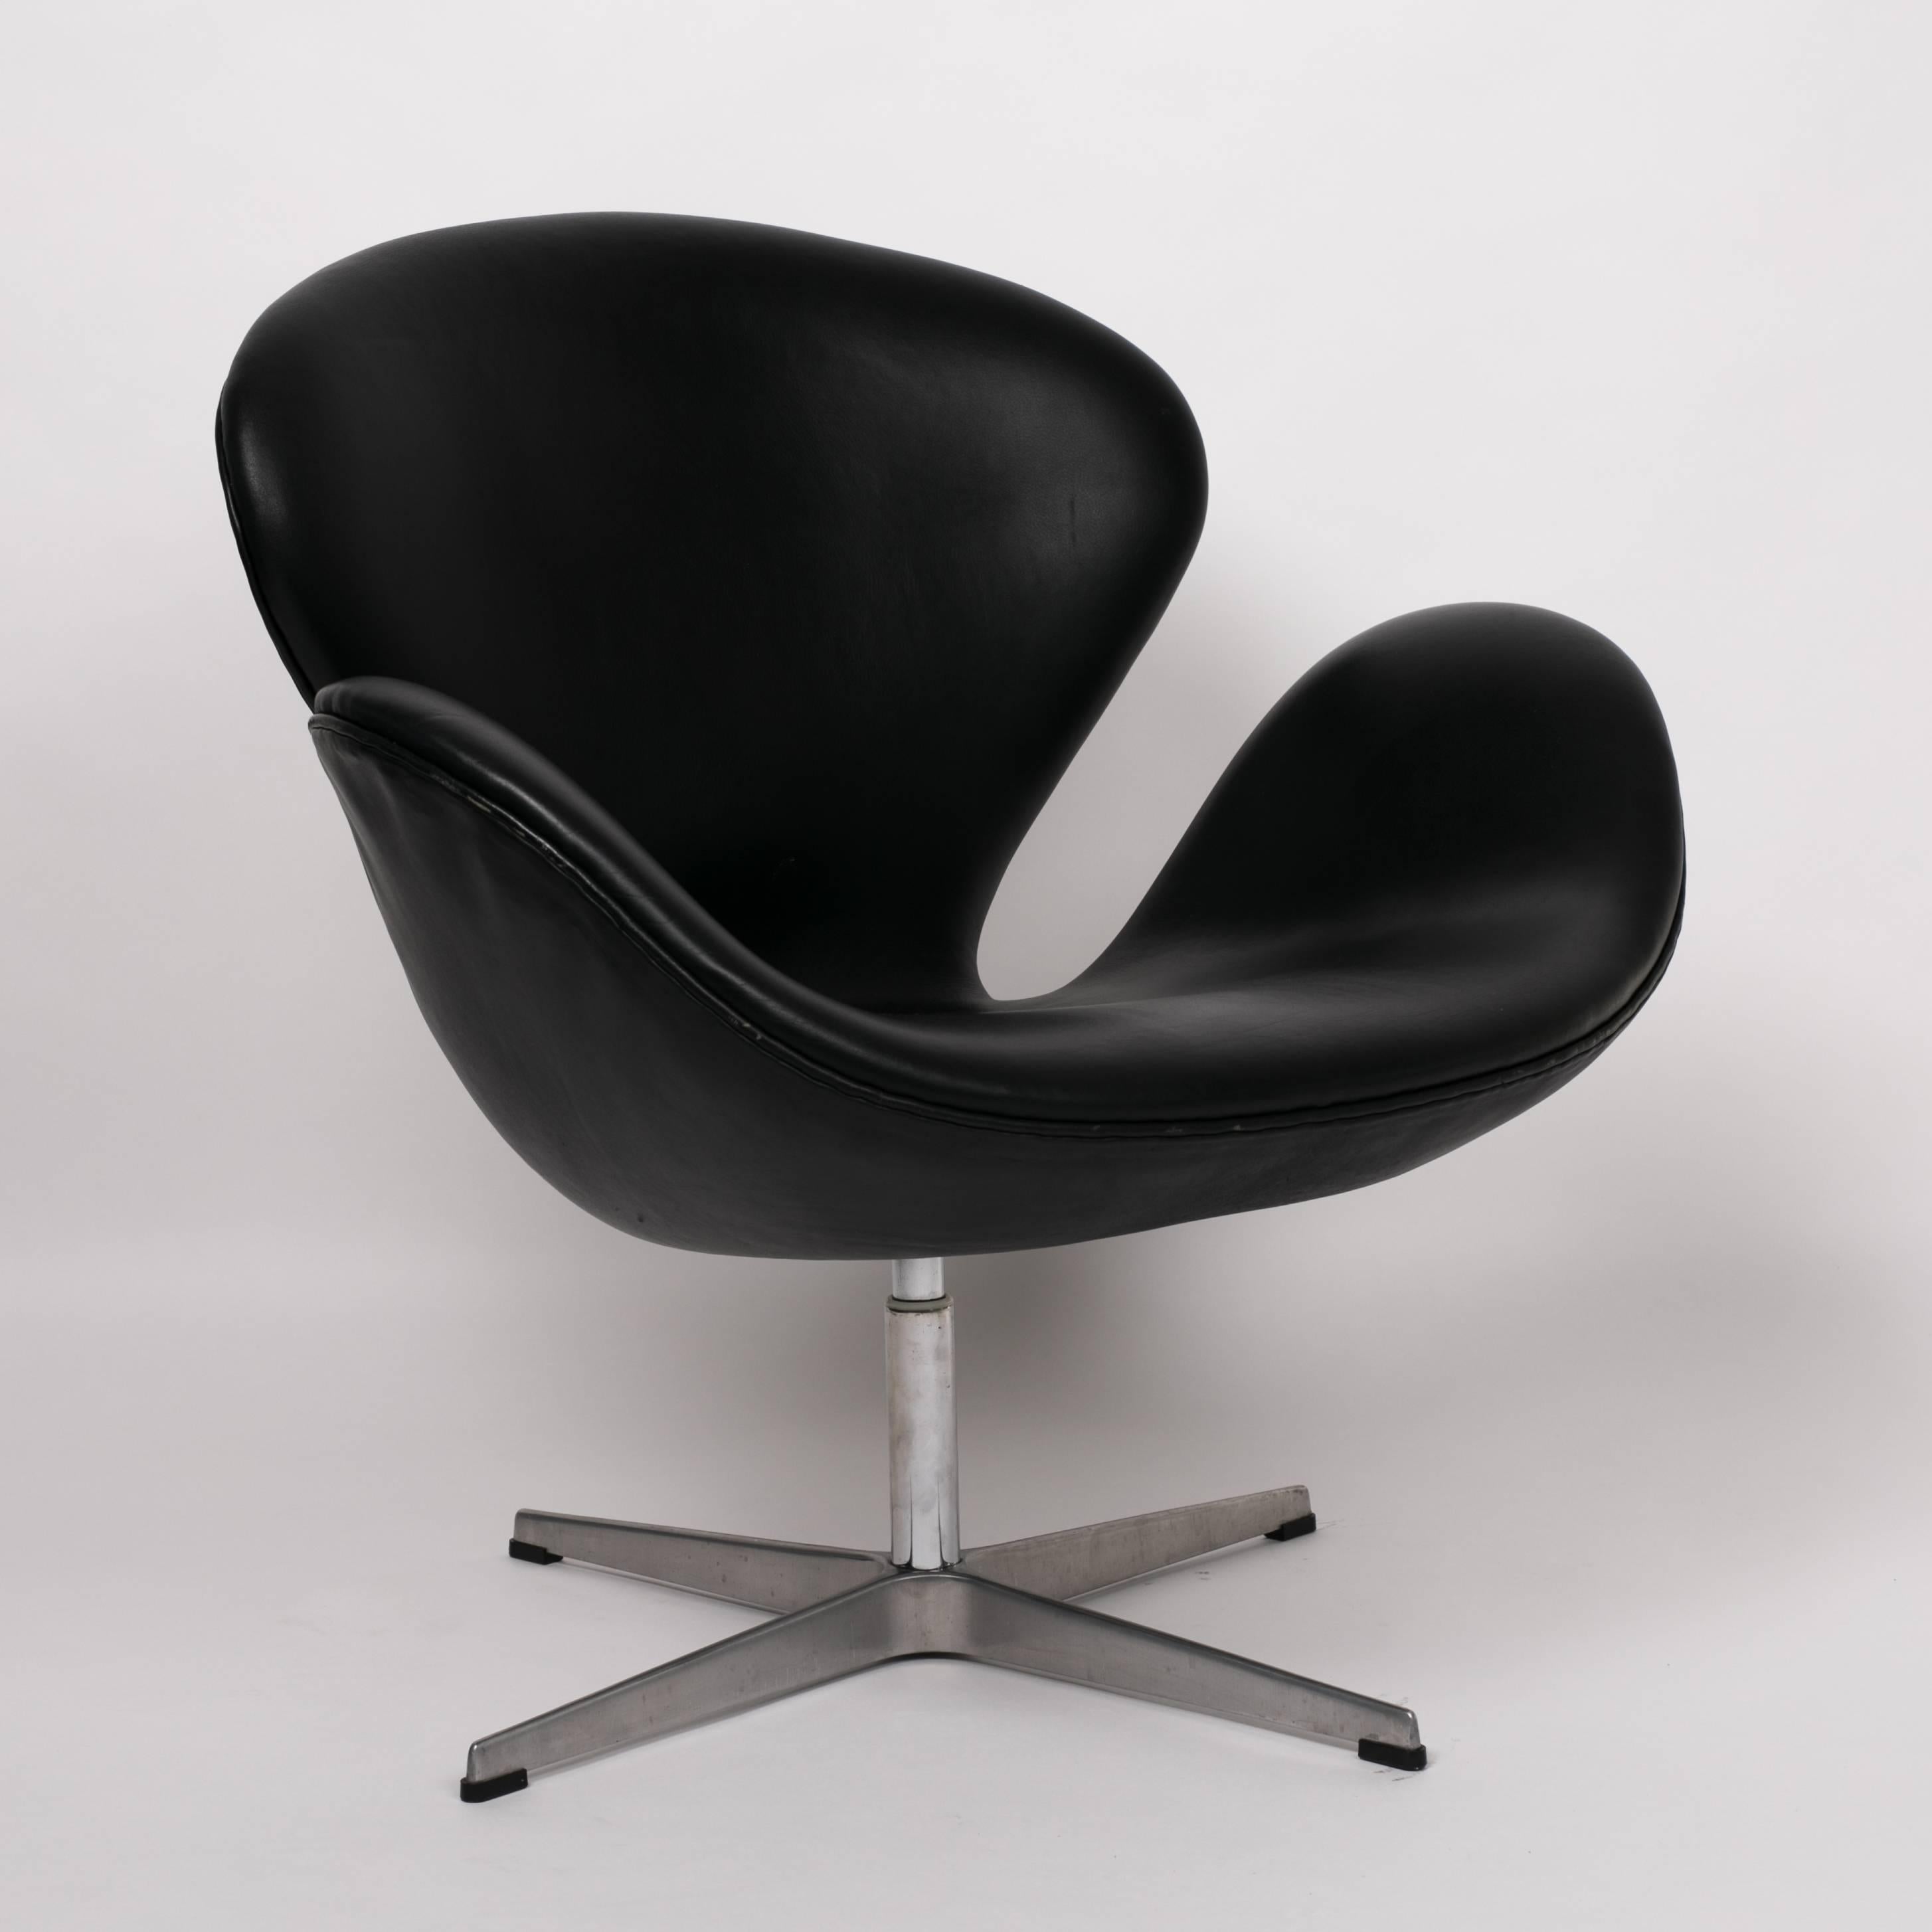 Arne Jacobsen’s “Swan Chair” was produced by Fritz Hansen, originally designed alongside another of his most significant works, the egg chair, for a the Royal Hotel Copenhagen in 1958. The chair features a shell of revolutionary-at-the-time